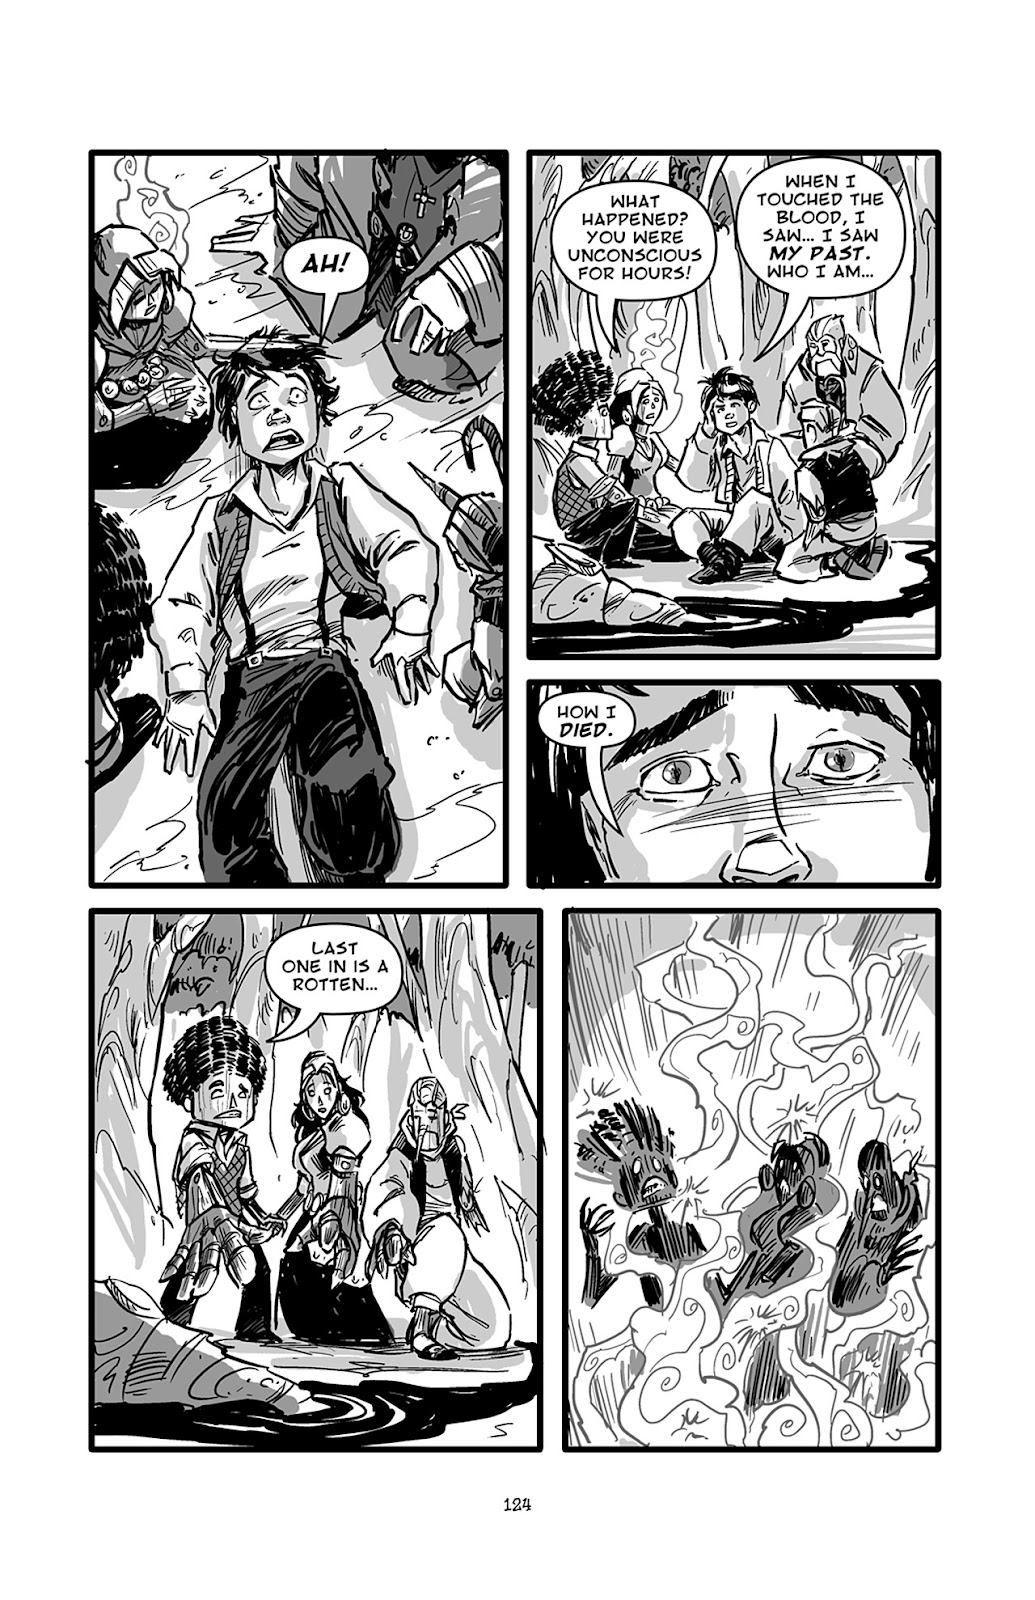 Pinocchio: Vampire Slayer - Of Wood and Blood issue 5 - Page 25